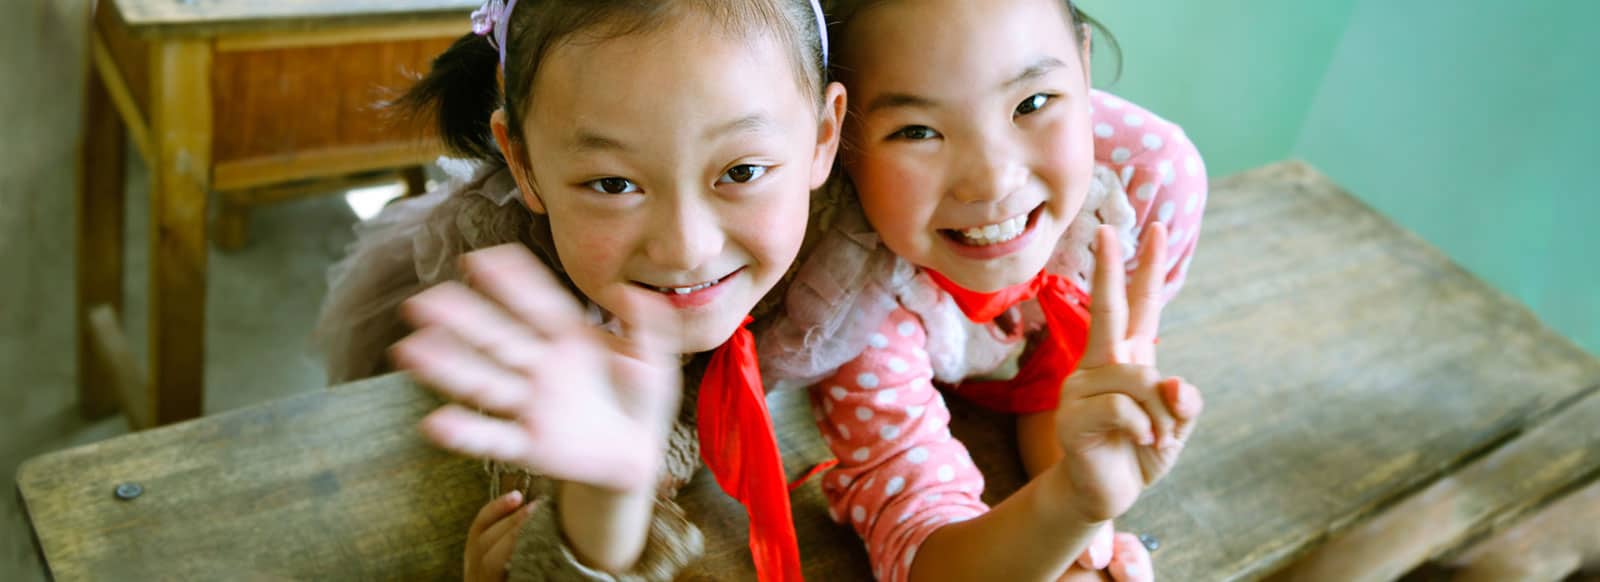 An image of two elementary aged girls hugging and smiling up at the camera while in school. One is waving and the other is giving a peace sign.